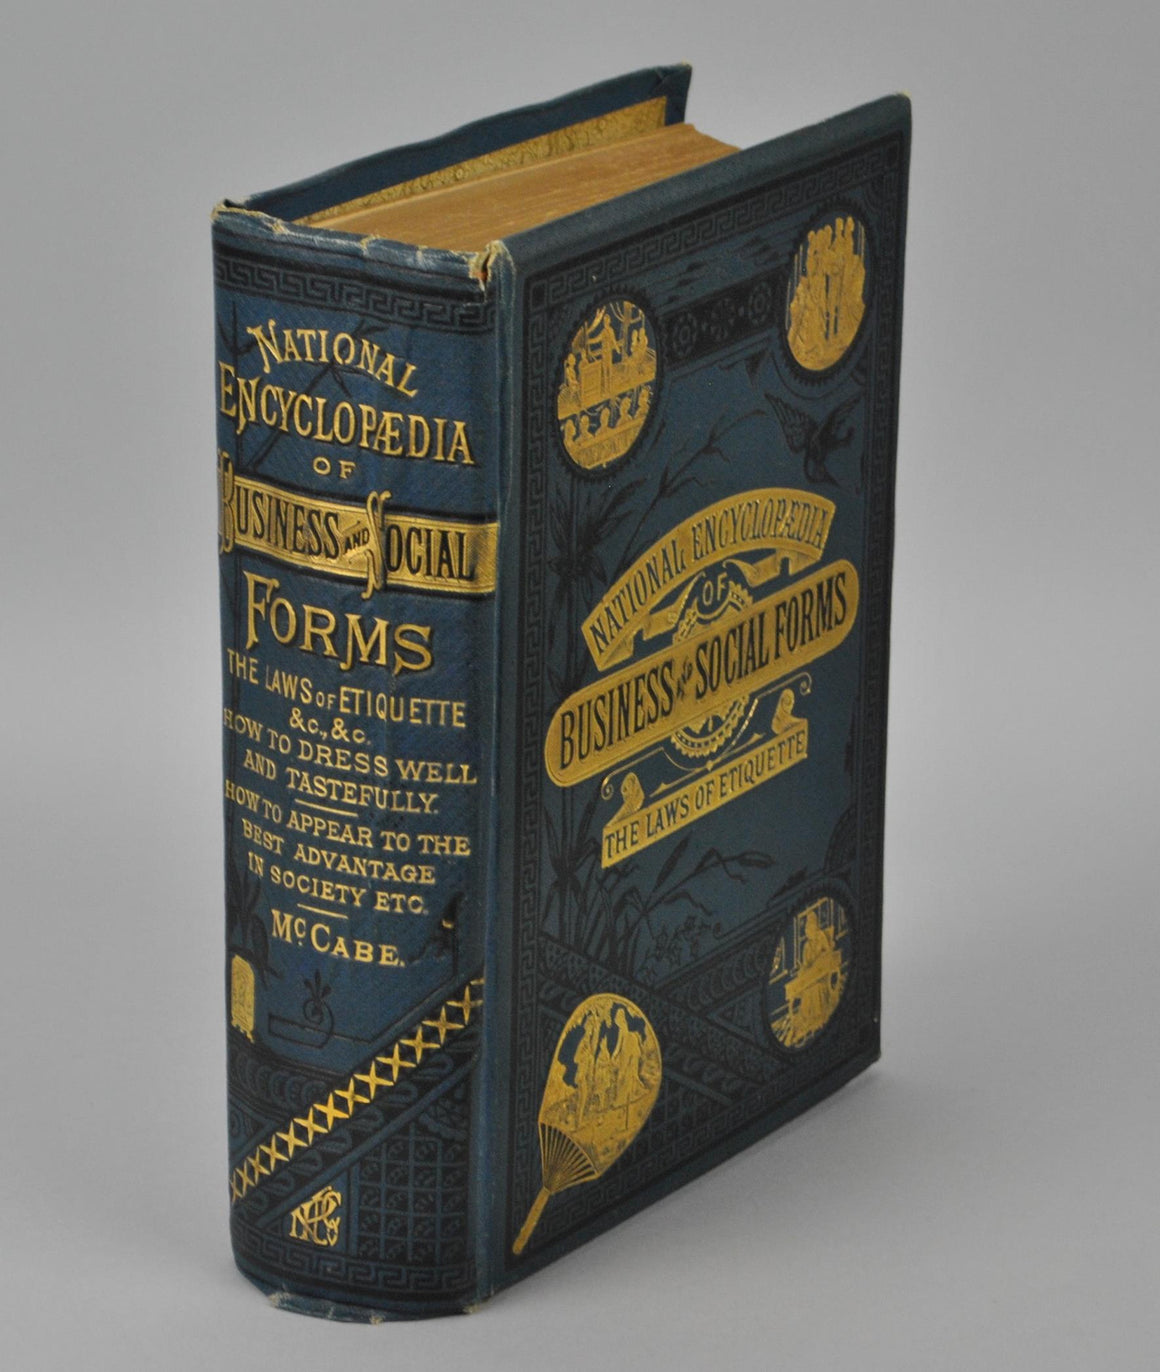 National Encyclopedia of Business and Social Forms by James McCabe 1879